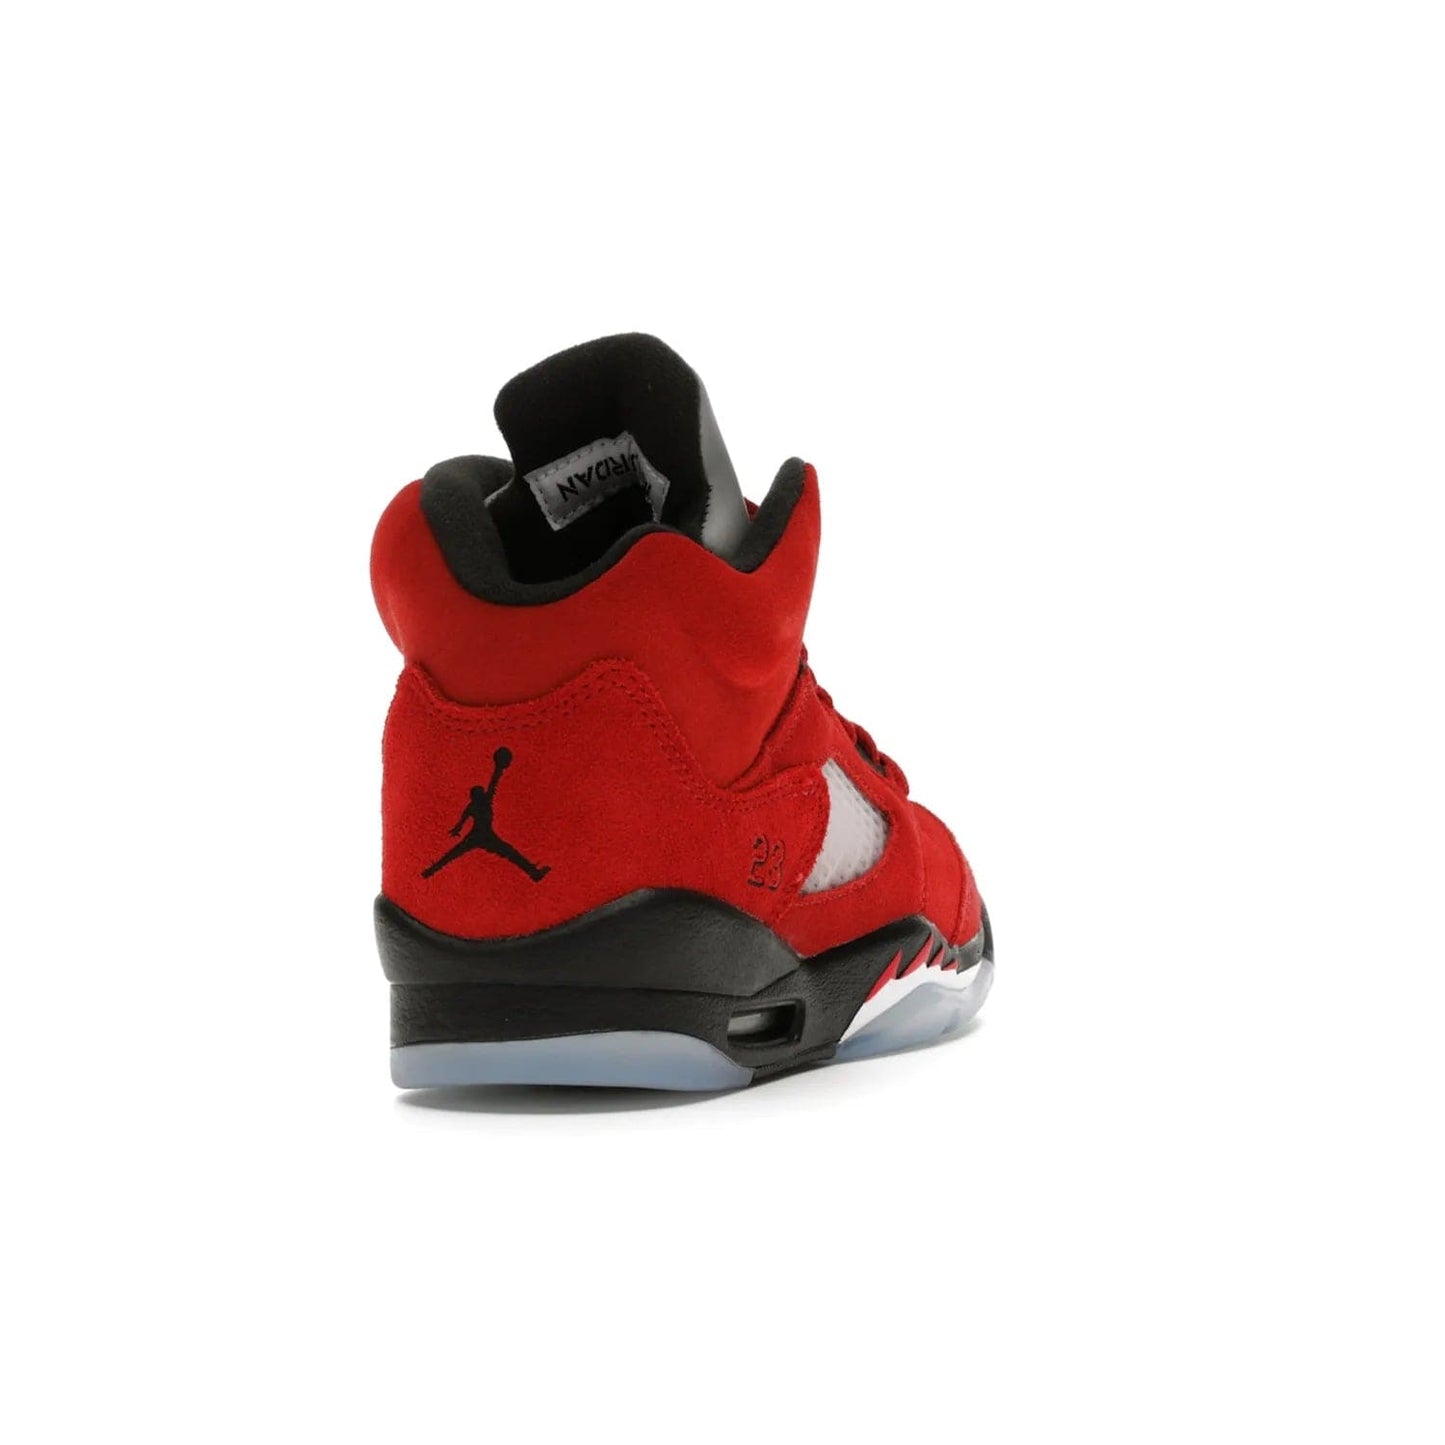 Jordan 5 Retro Raging Bull Red (2021) (GS) - Image 30 - Only at www.BallersClubKickz.com - Jordan 5 Retro Raging Bulls Red 2021 GS. Varsity Red suede upper with embroidered number 23, black leather detail, red laces, and midsole with air cushioning. Jumpman logos on tongue, heel, and outsole. On-trend streetwear and basketball style. Released April 10, 2021.